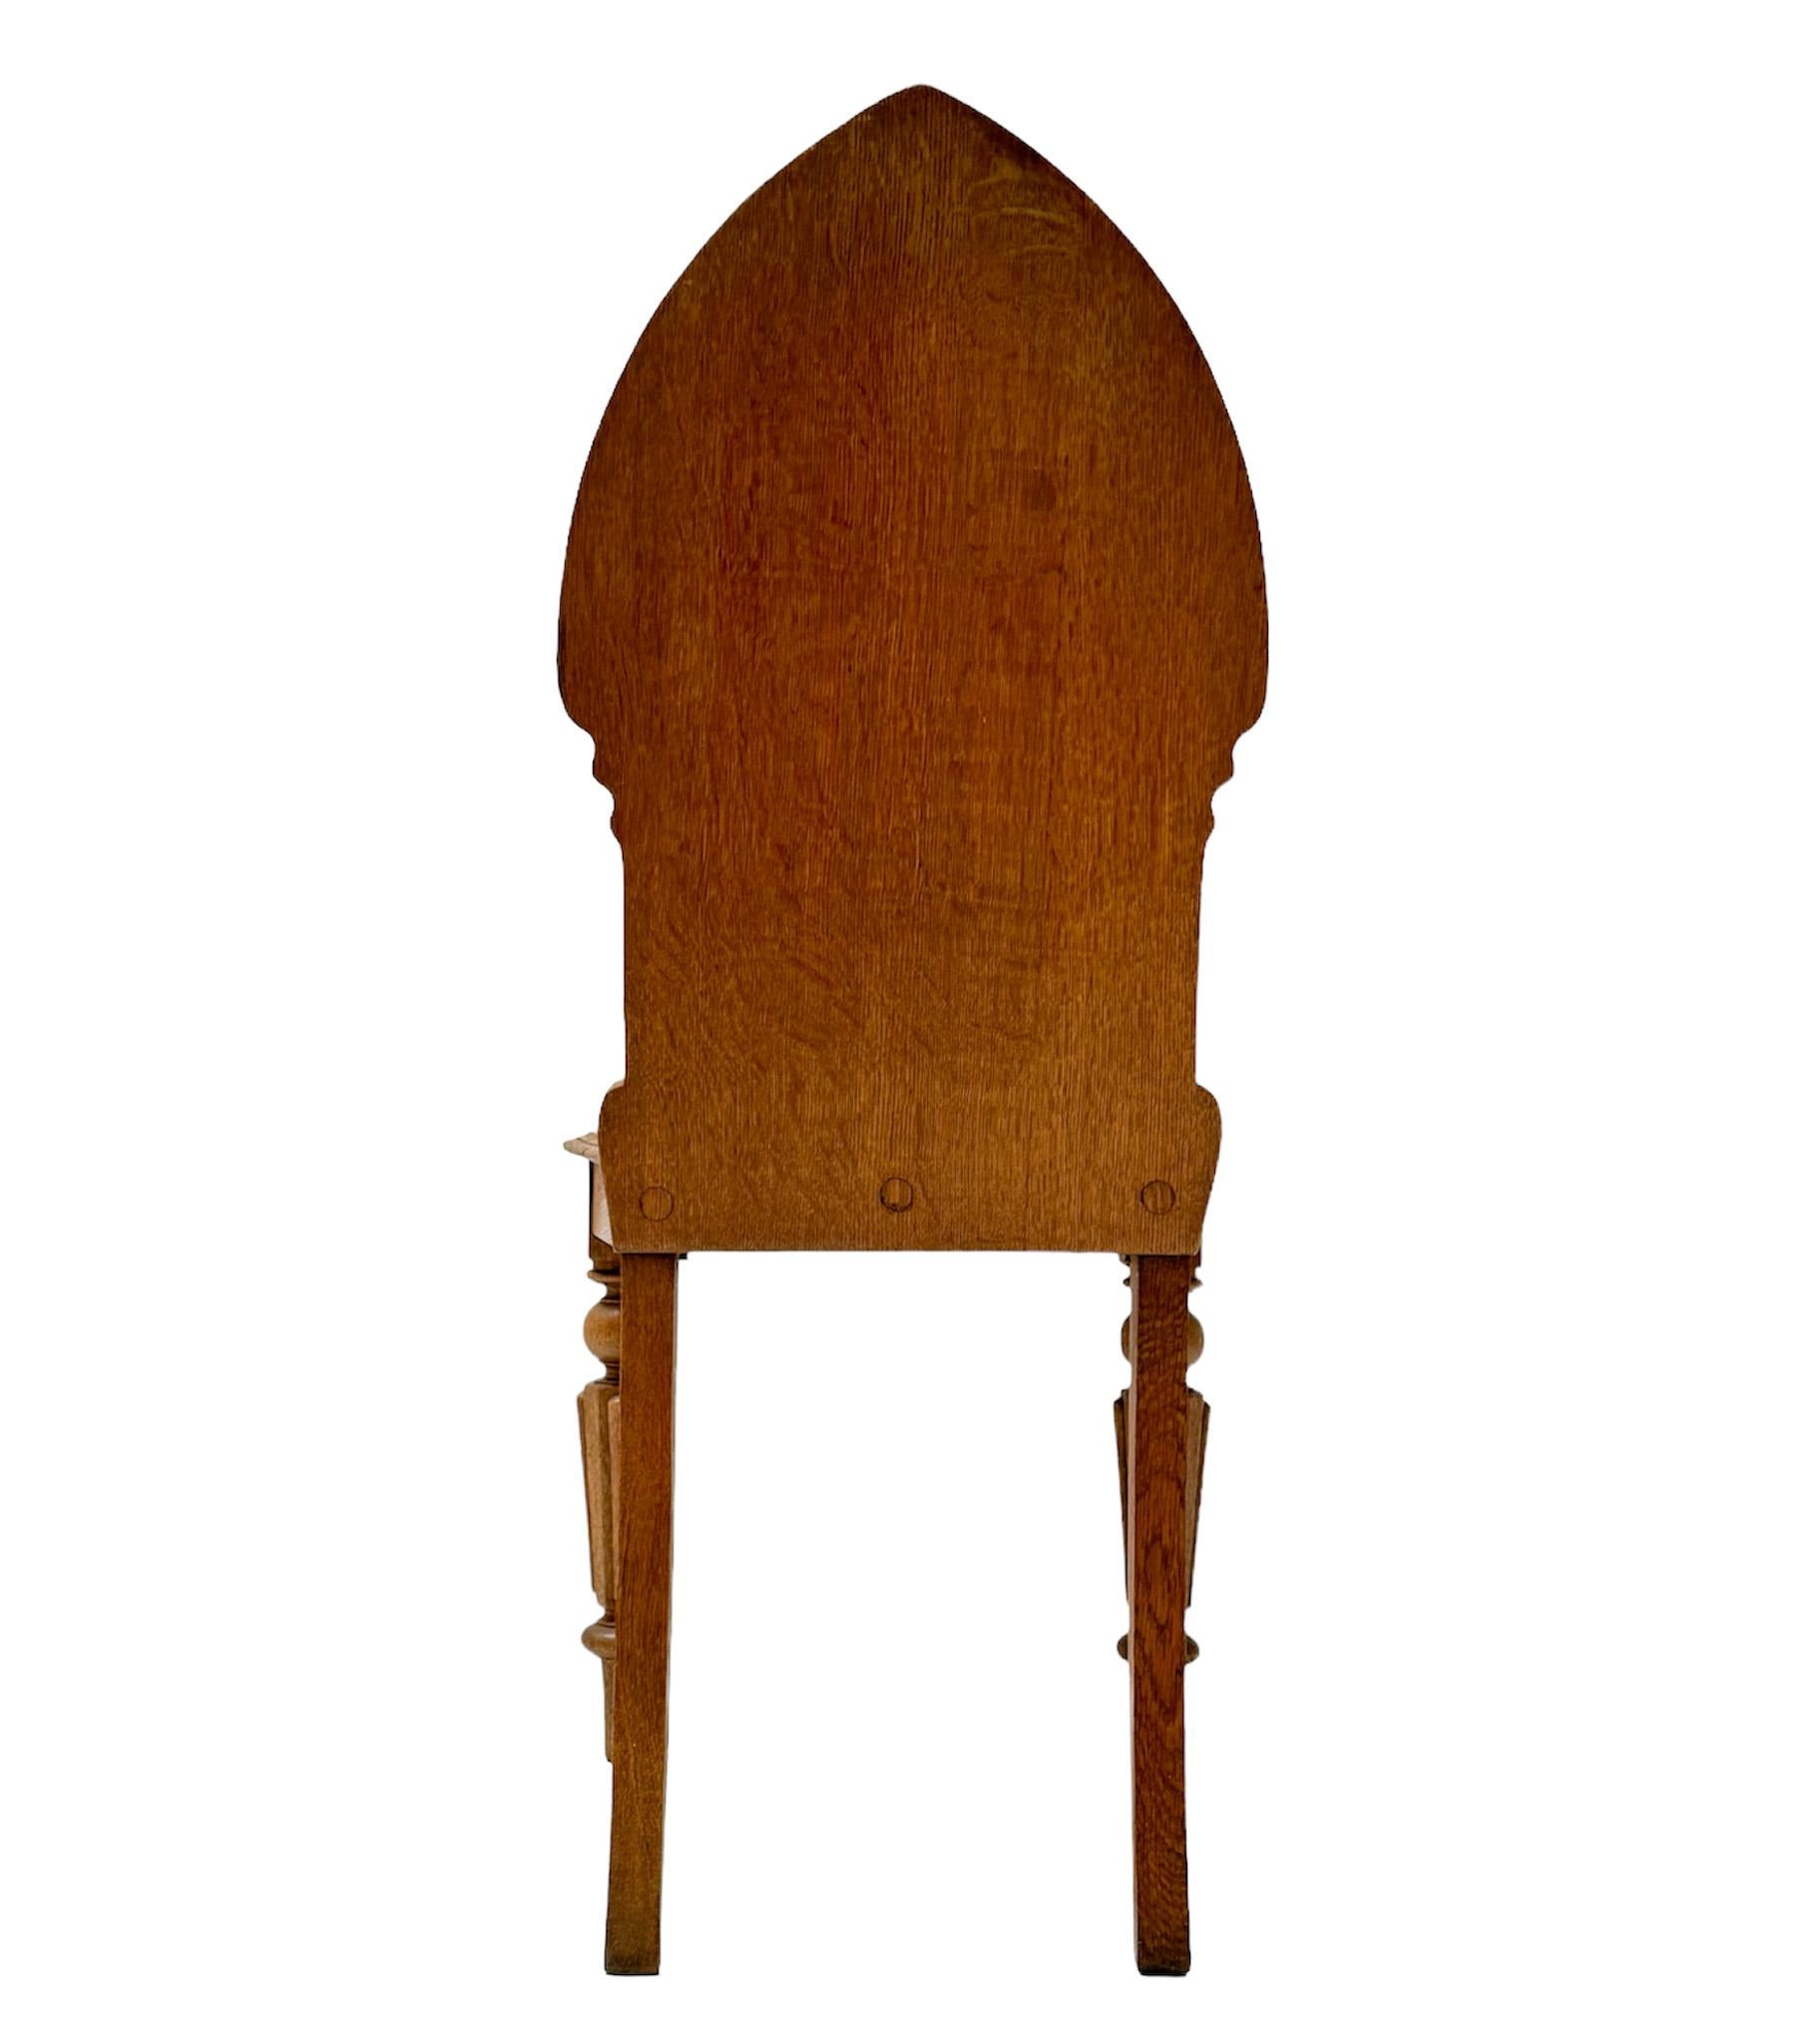 Stunning and rare Gothic Revival side chair.
Striking Dutch design from the 1930s.
Solid oak frame with original hand-carved elements.
This wonderful Gothic Revival side chair is in very good original condition with minor wear consistent with age